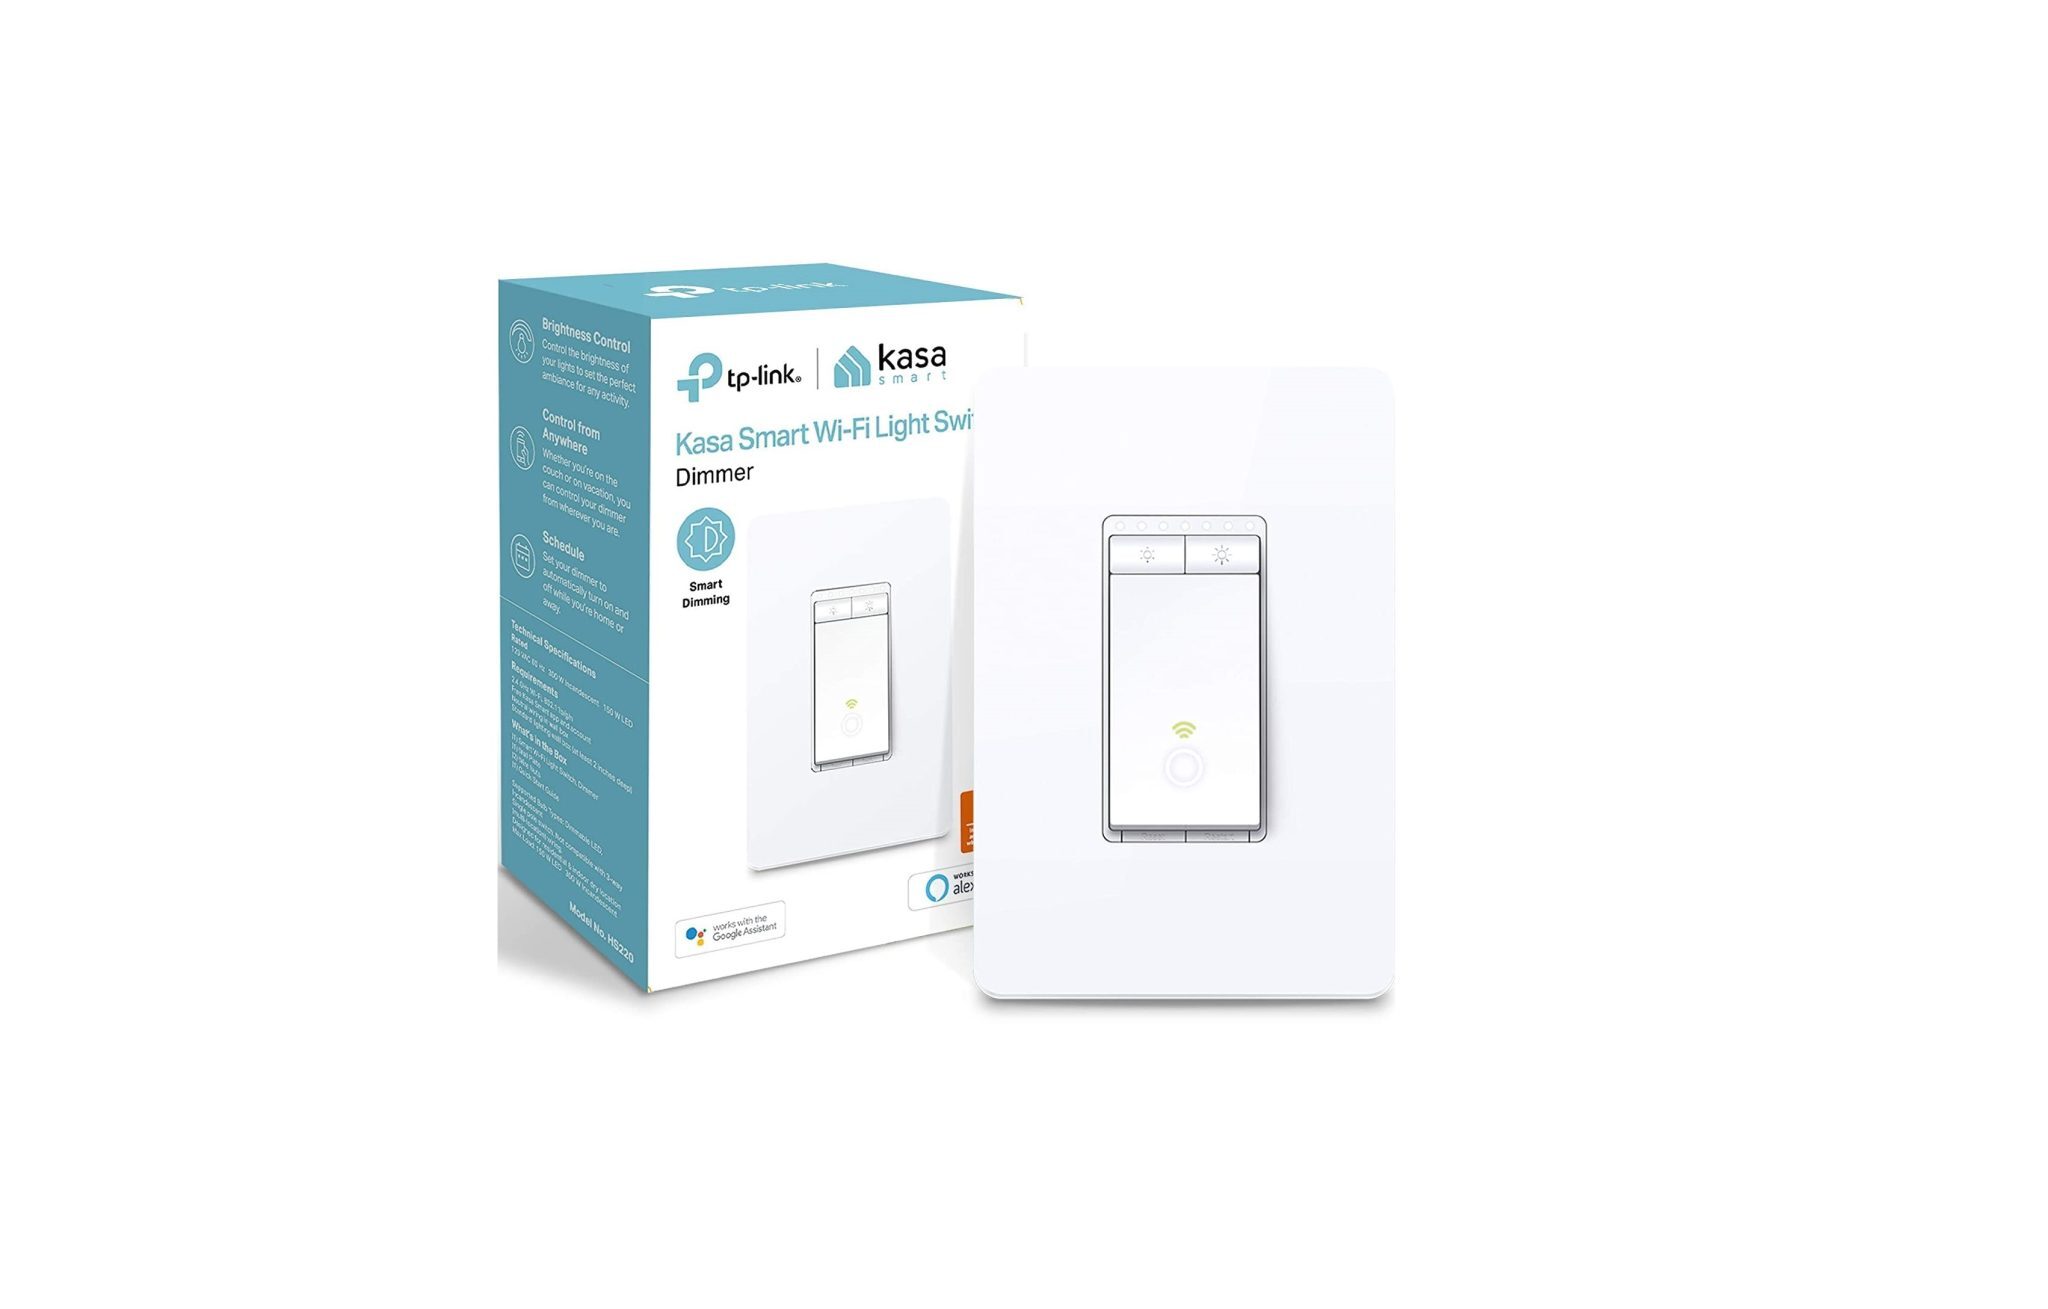 tp-link HS220 Kasa Smart Wi-Fi Dimmer Switch